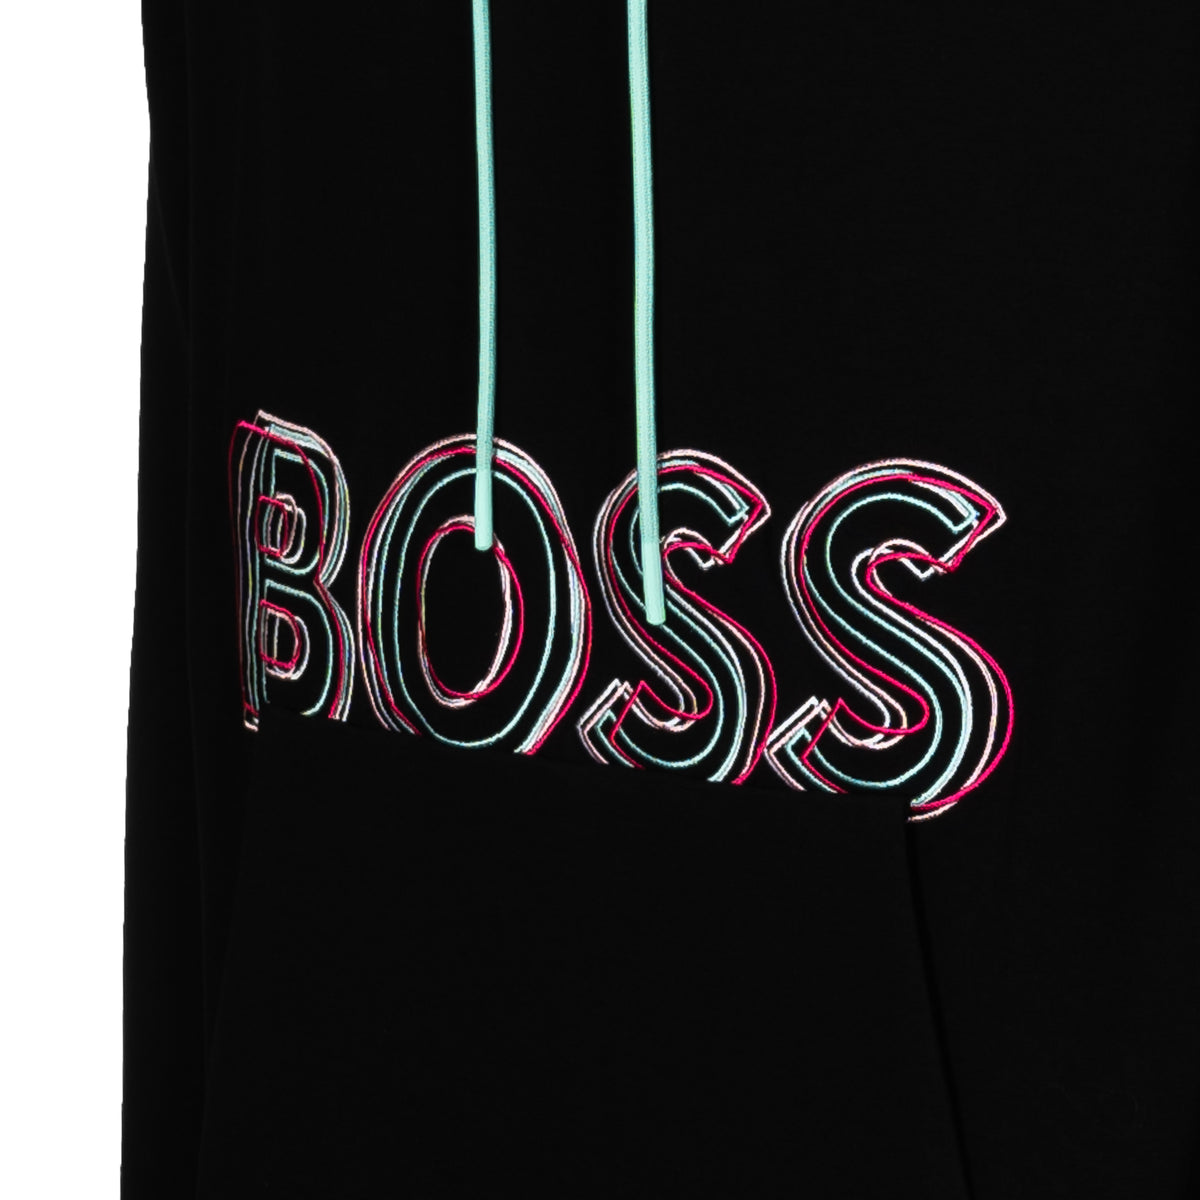 Load image into Gallery viewer, BOSS Black Soody 1 Embroidered Logo Hoodie
